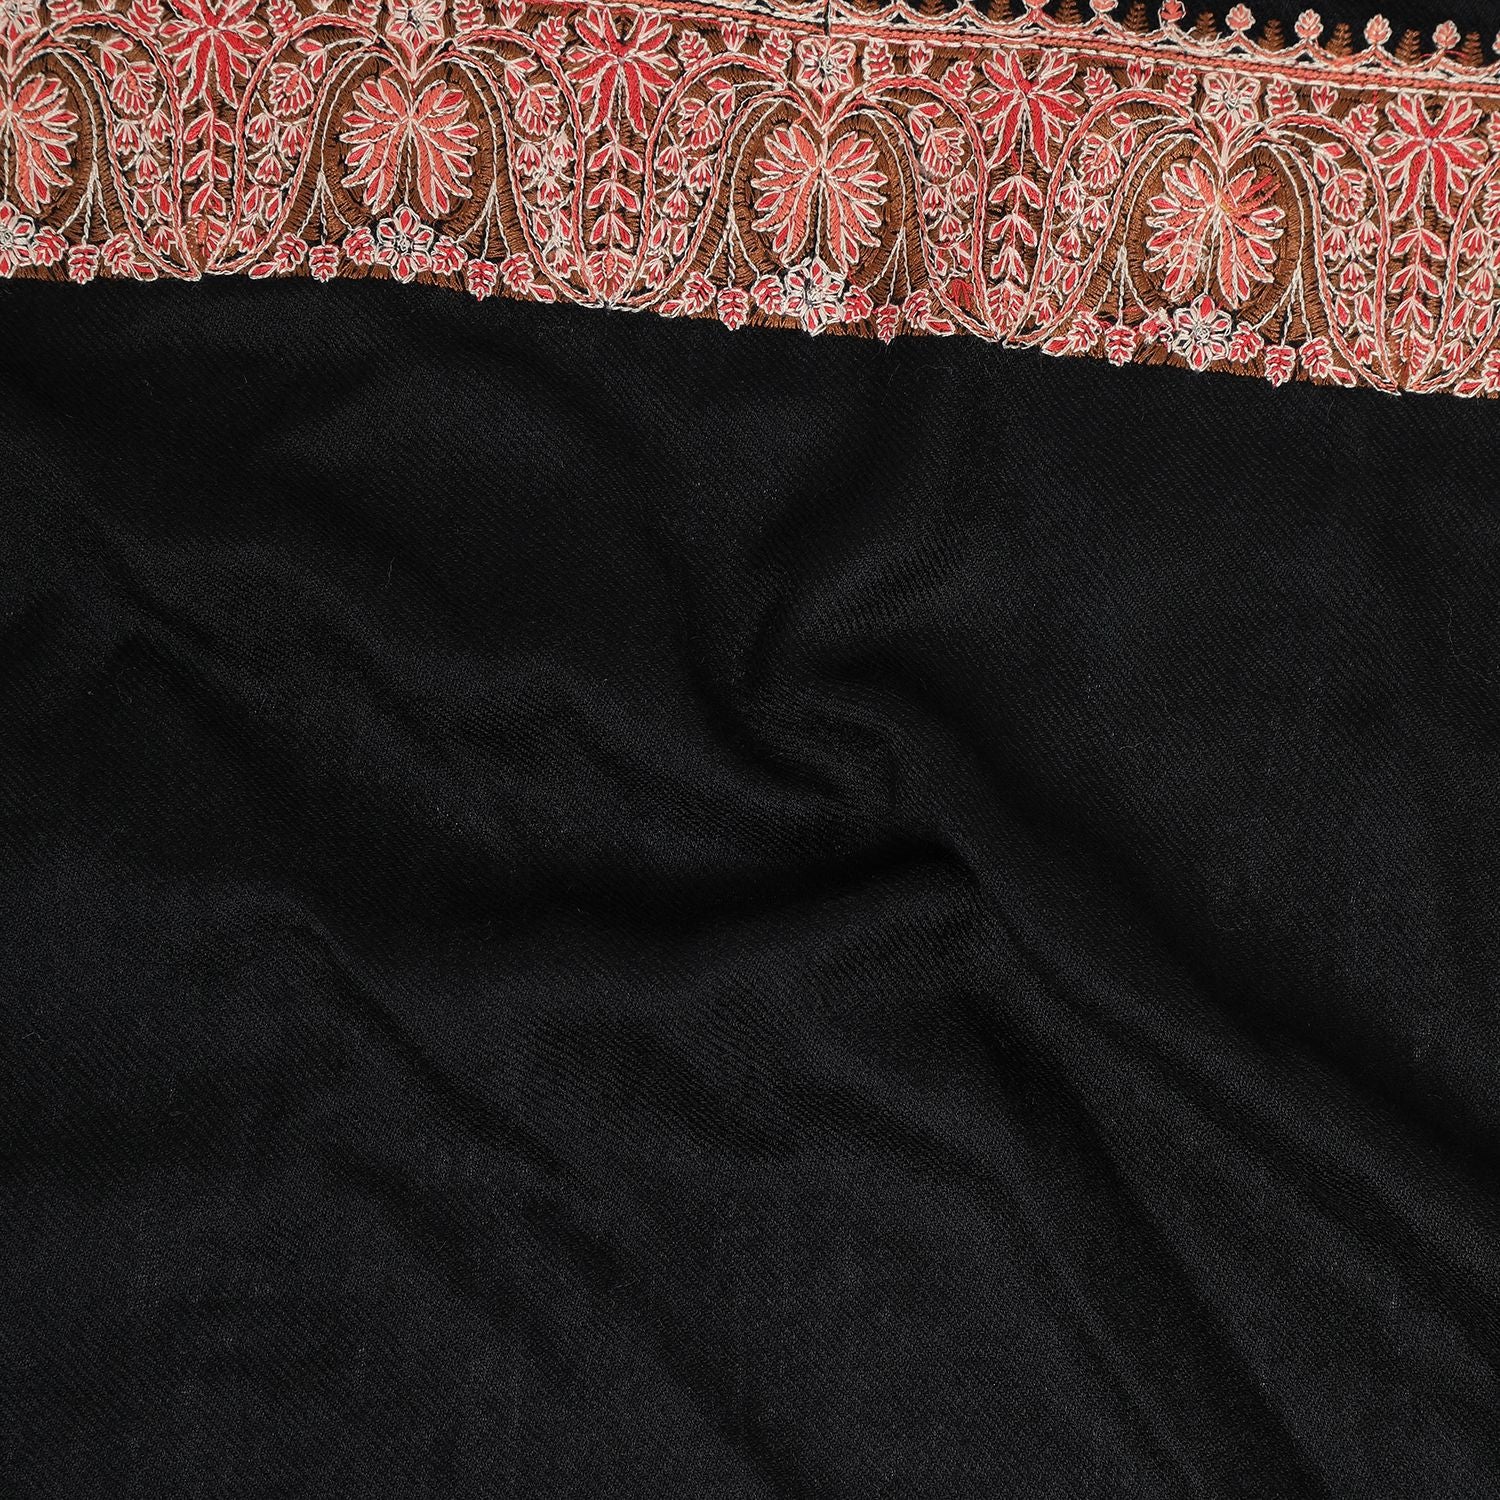 Pure Wool Hand Embroidered Kashmiri Shawl, Certified by The Woolmark Company (Size: 40x80 Inches)